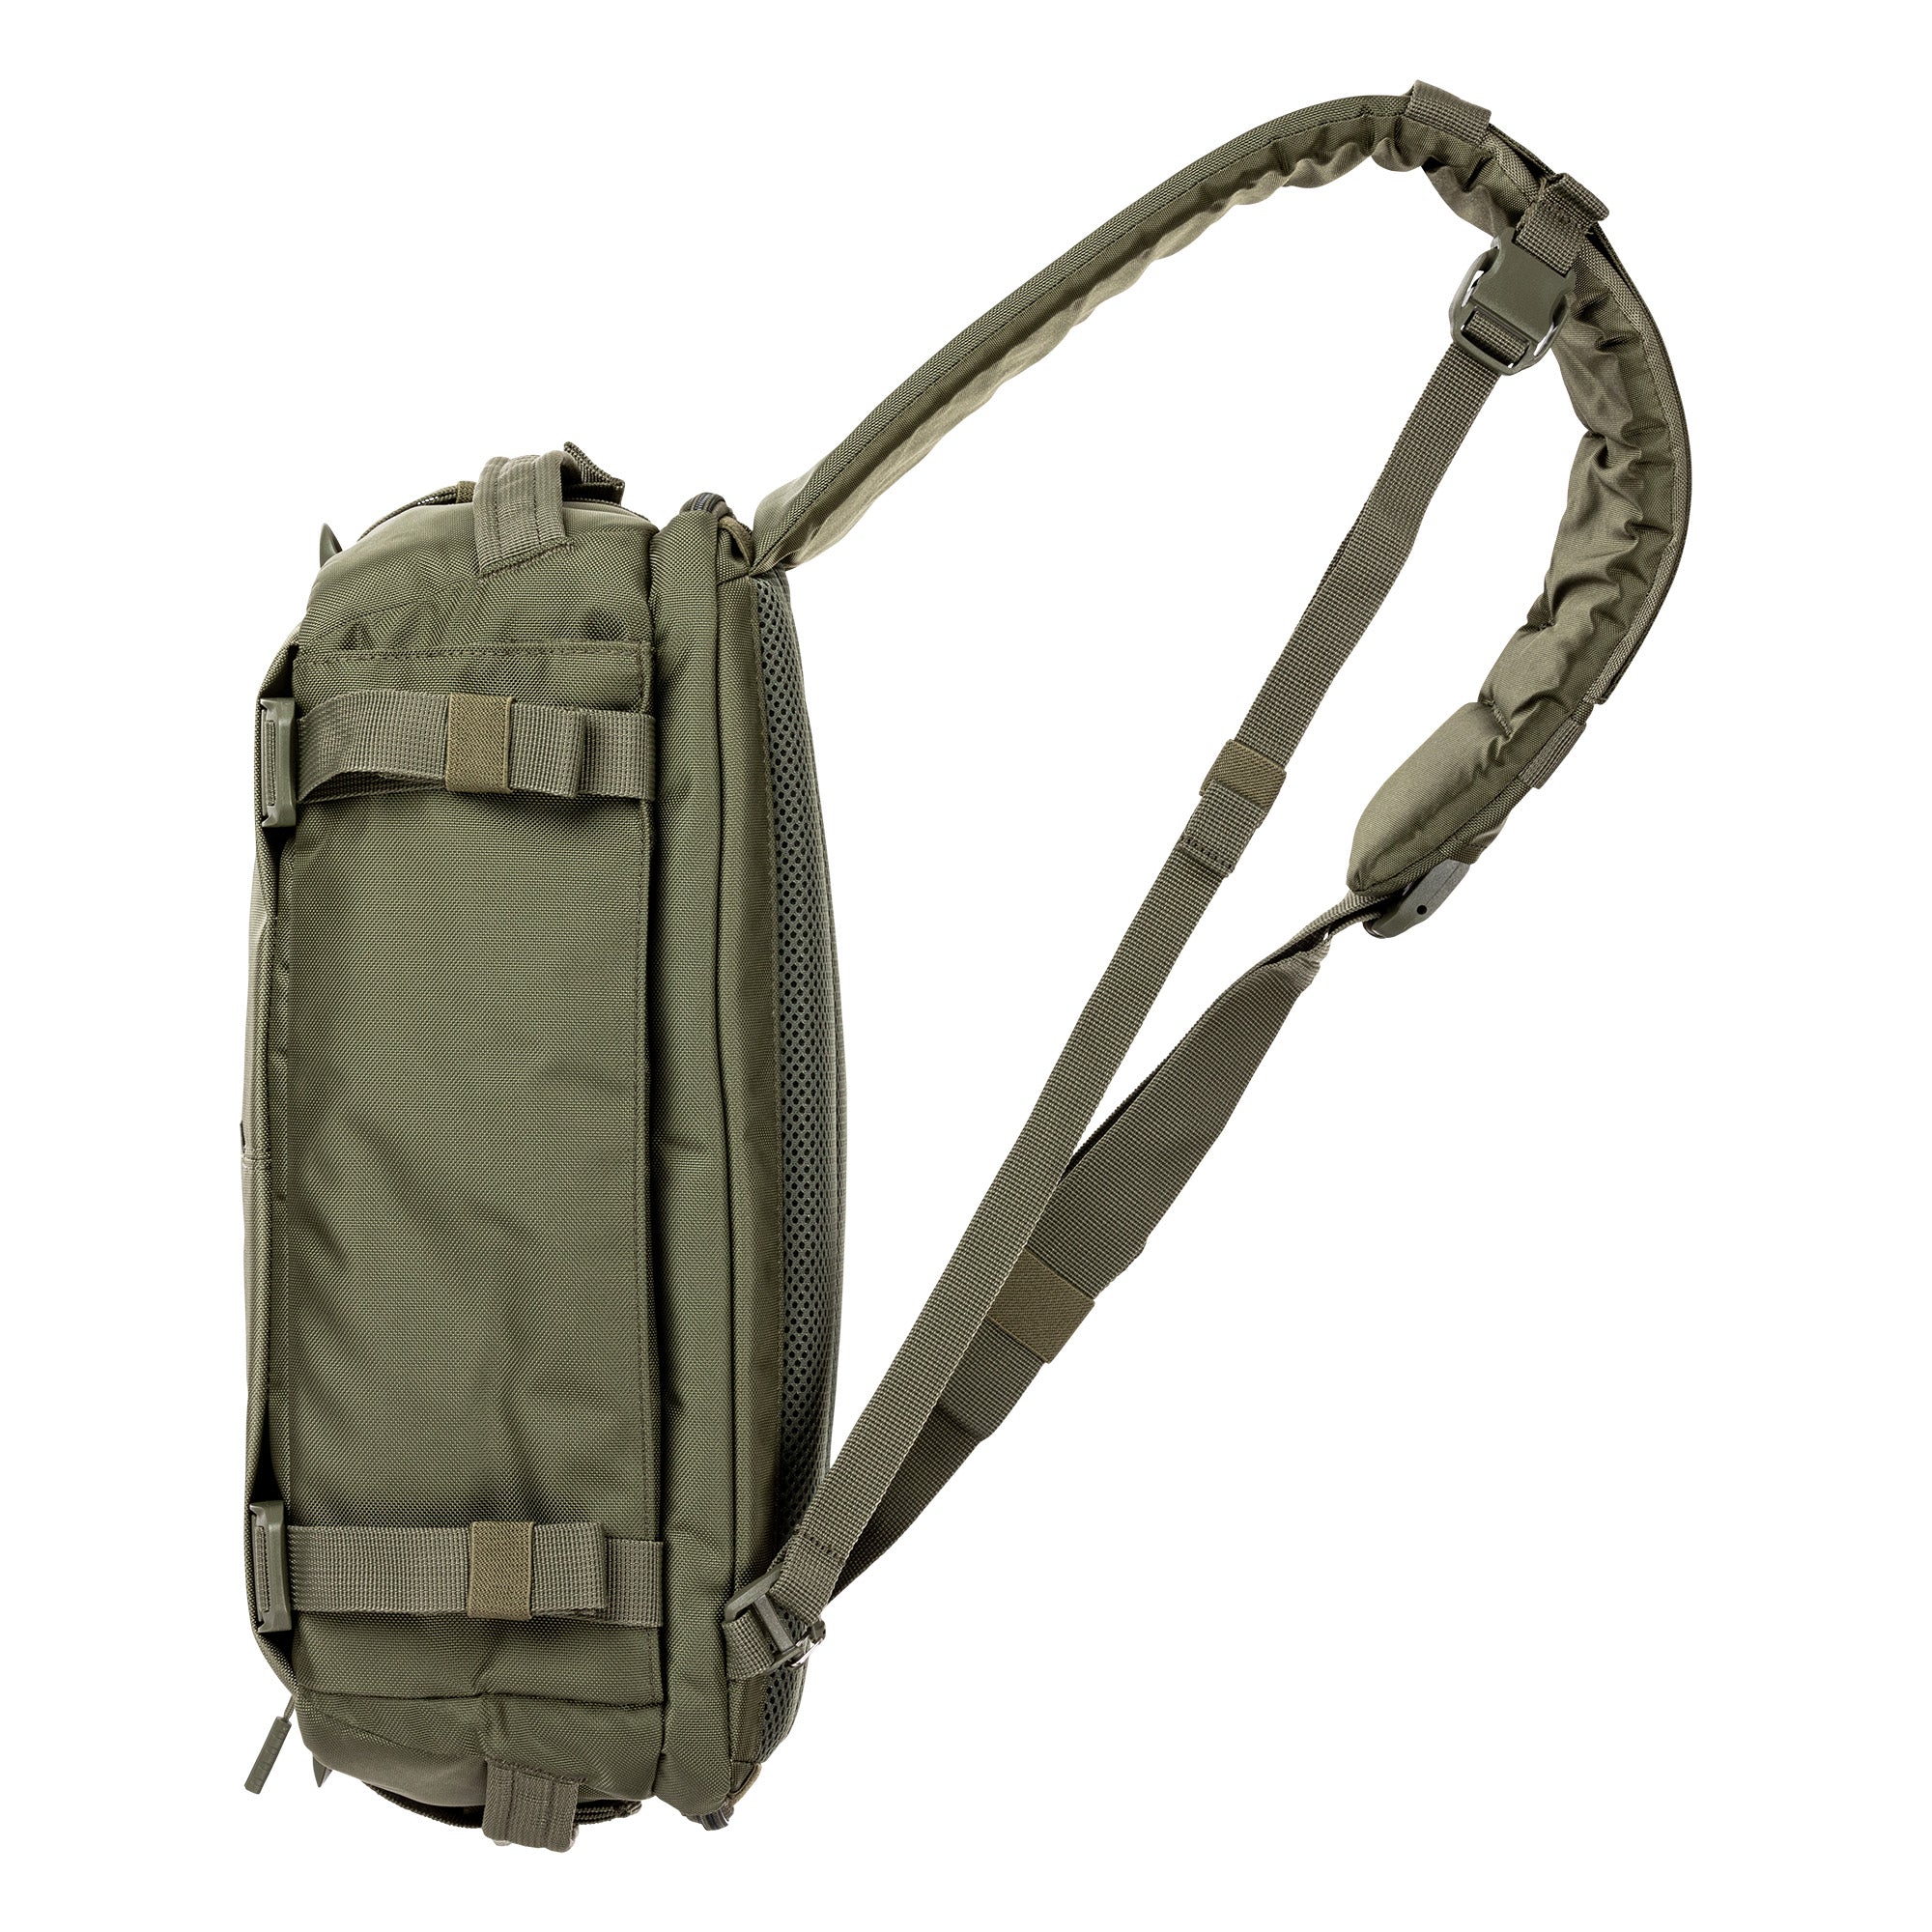 5.11 Tactical LV10 Sling Pack 2.0 13L Bags, Packs and Cases 5.11 Tactical Tactical Gear Supplier Tactical Distributors Australia